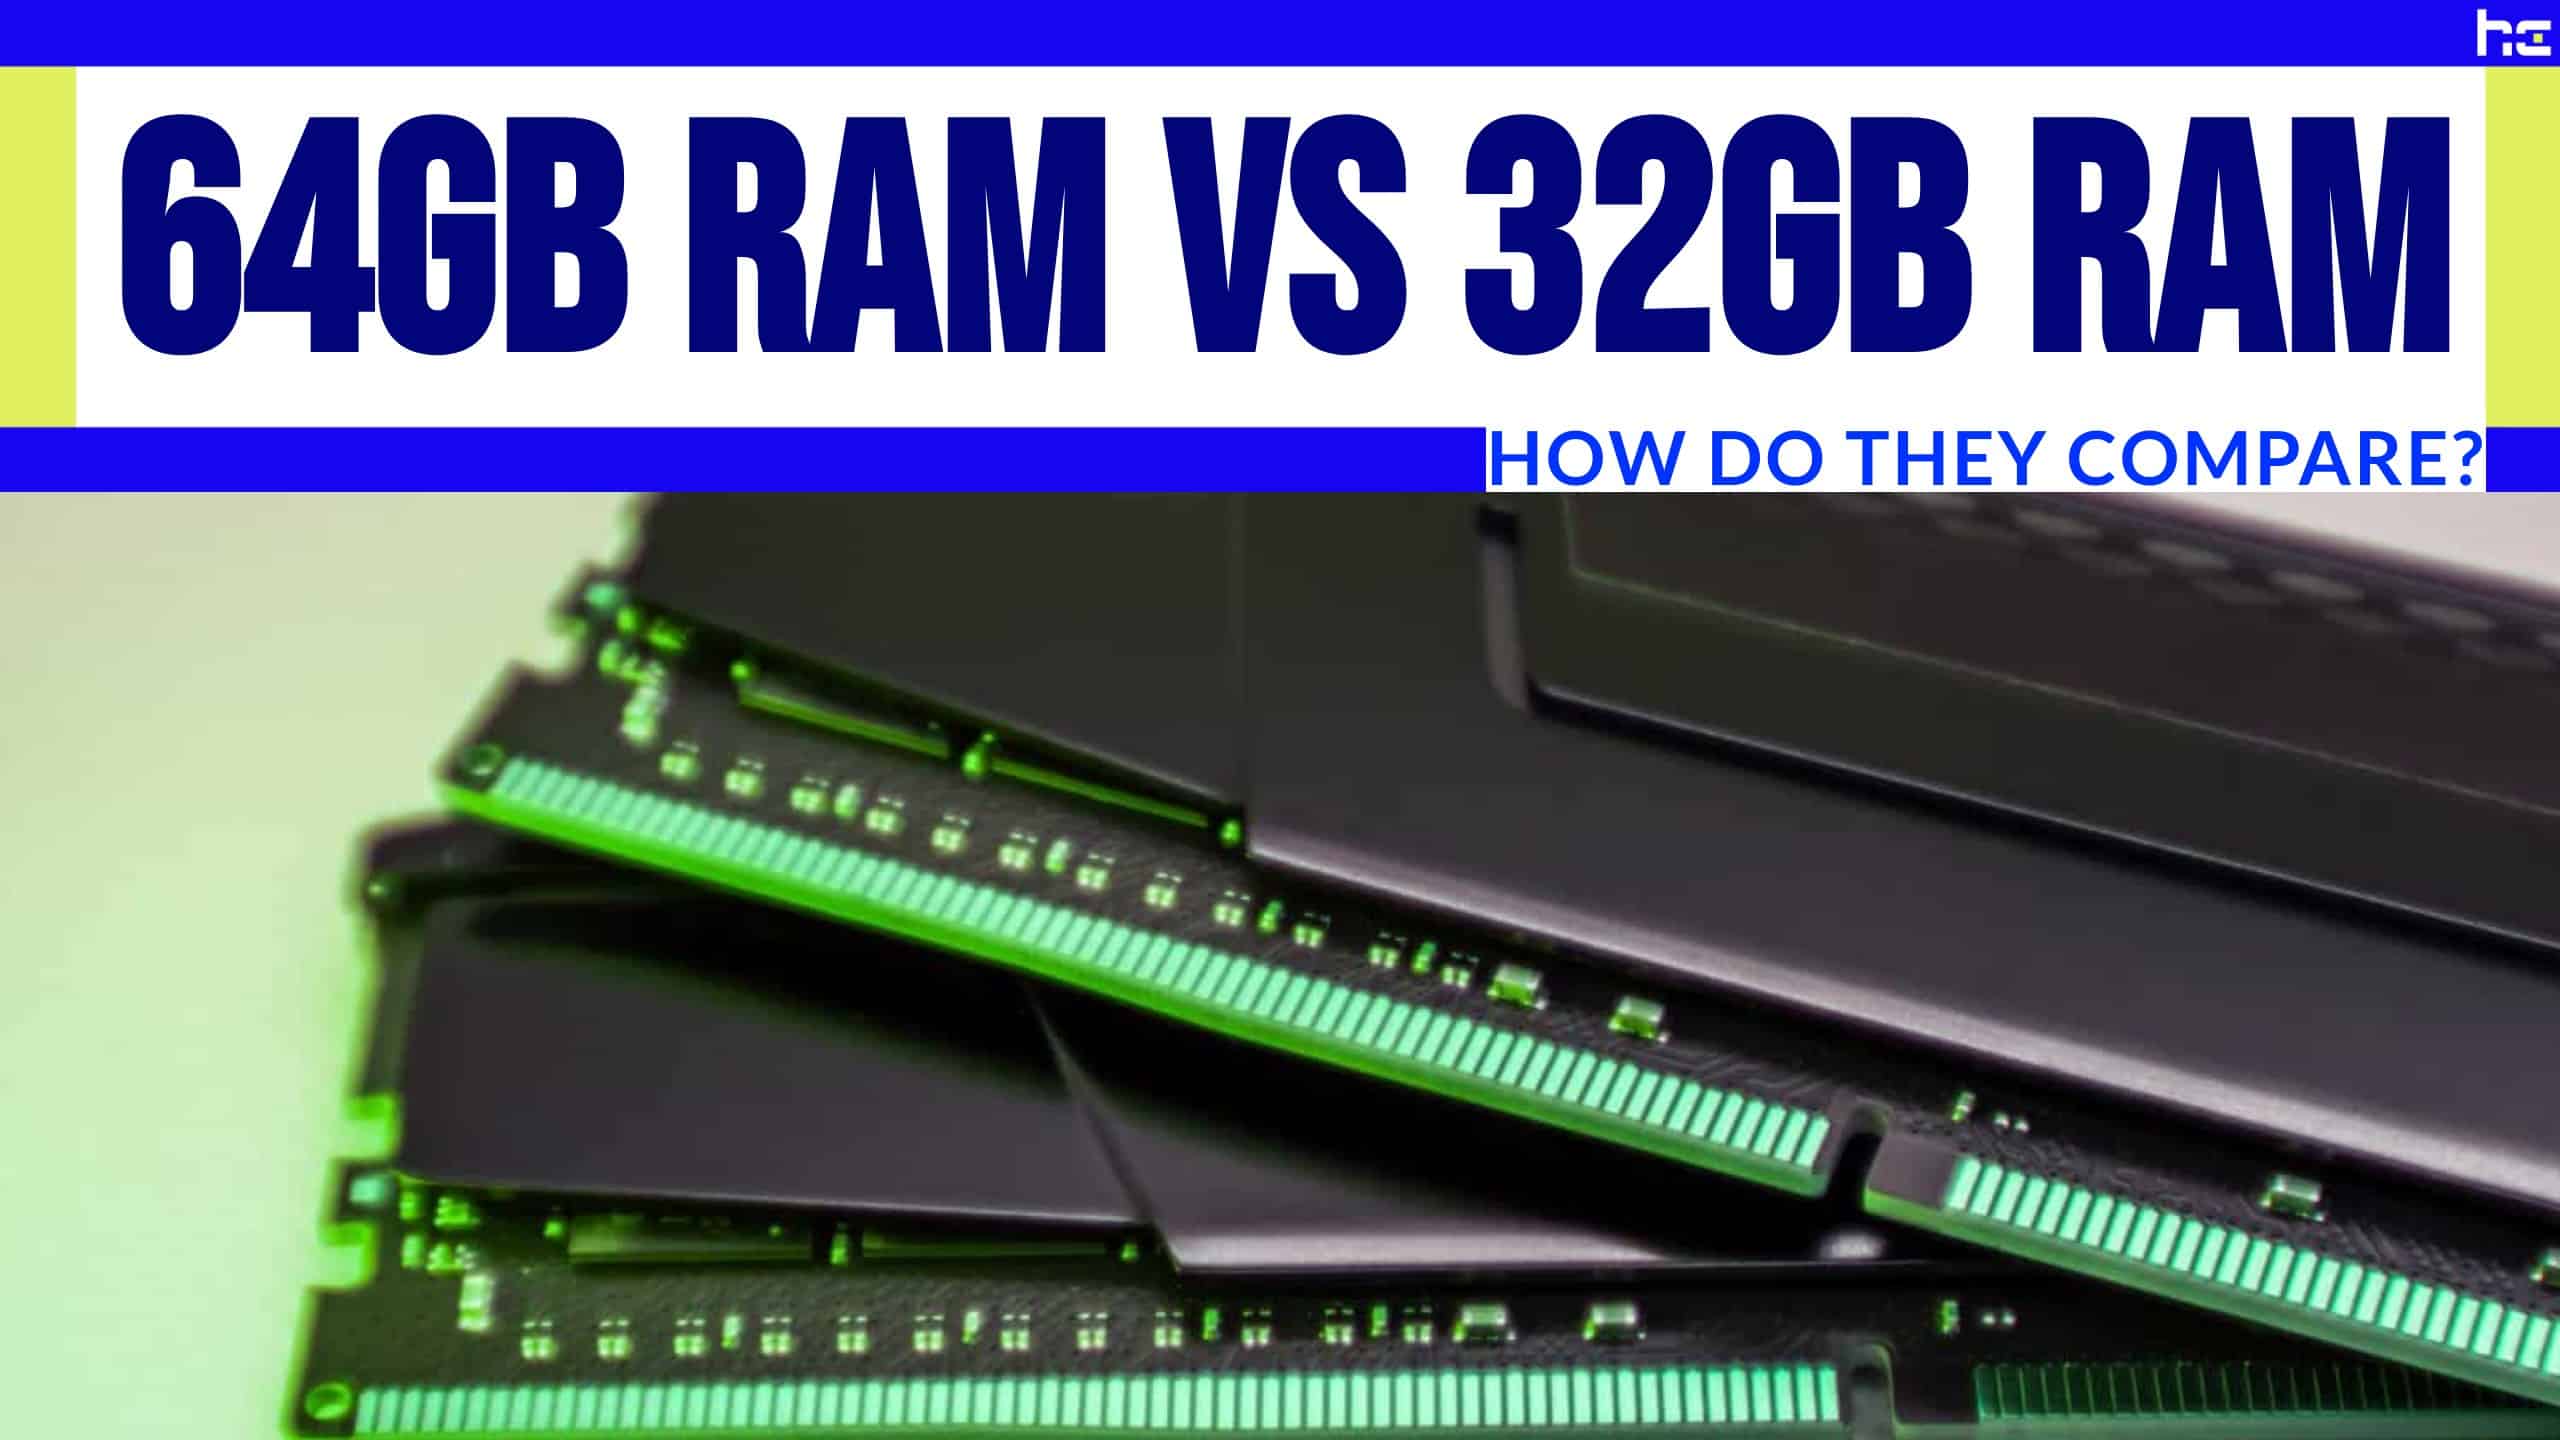 featured image for 64gb ram vs 32gb ram